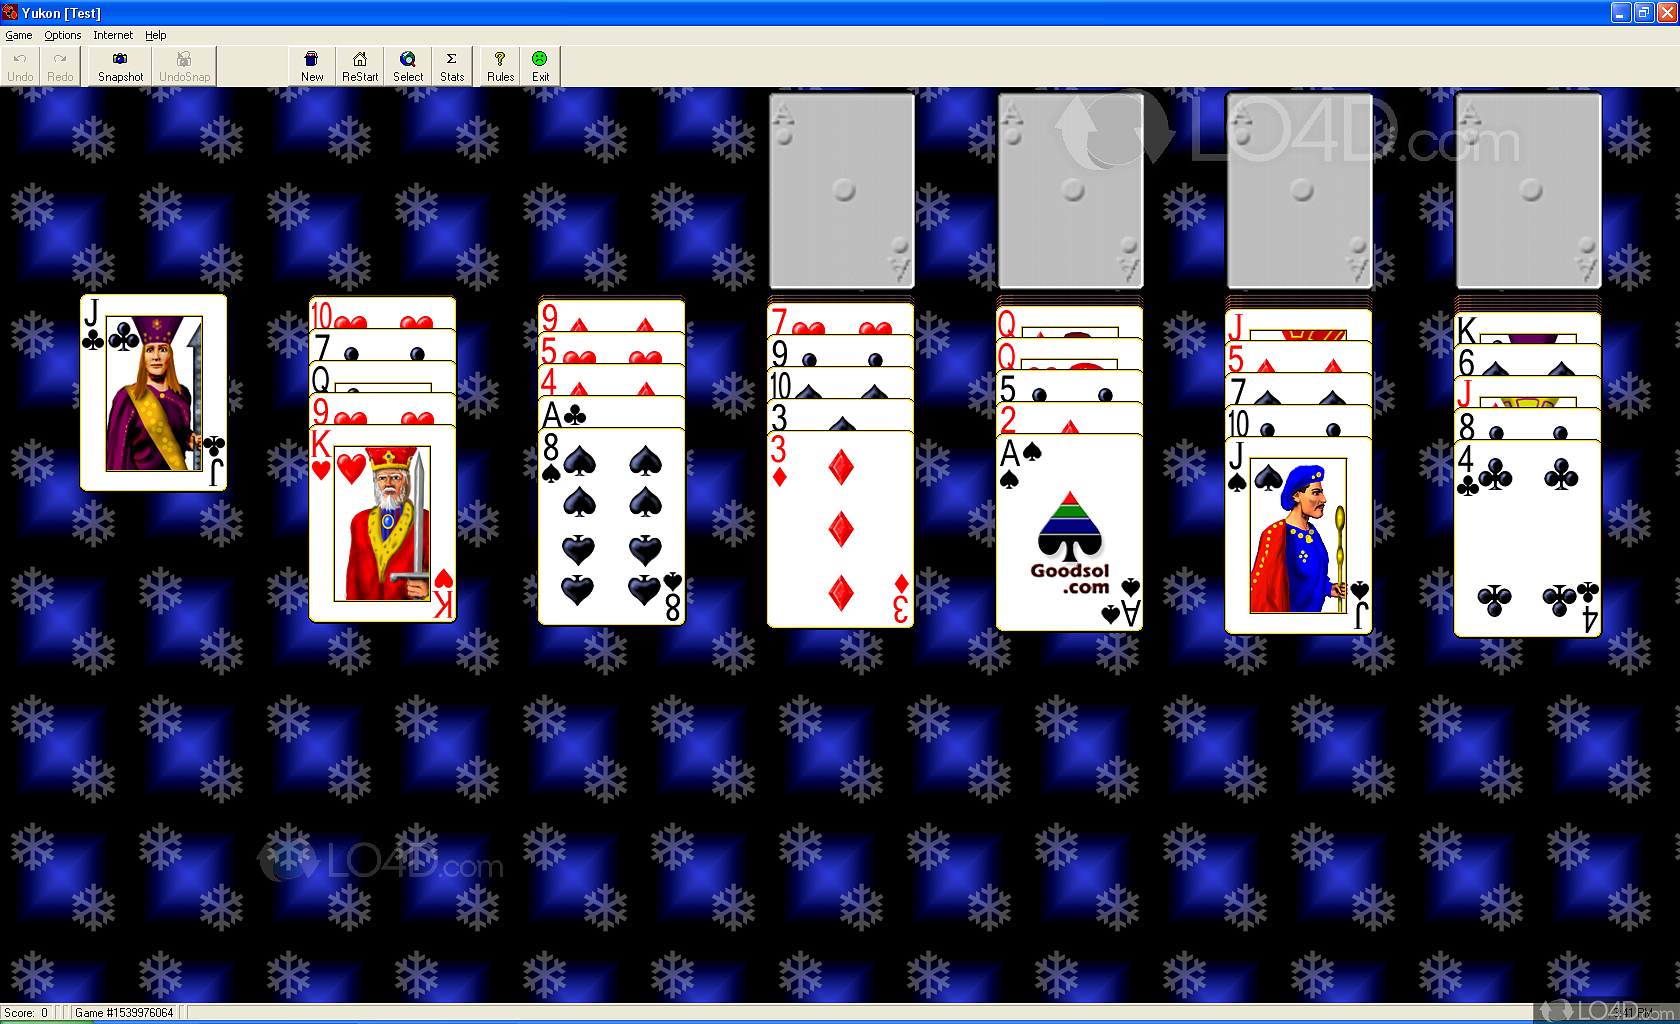 torrent pretty good solitaire 19